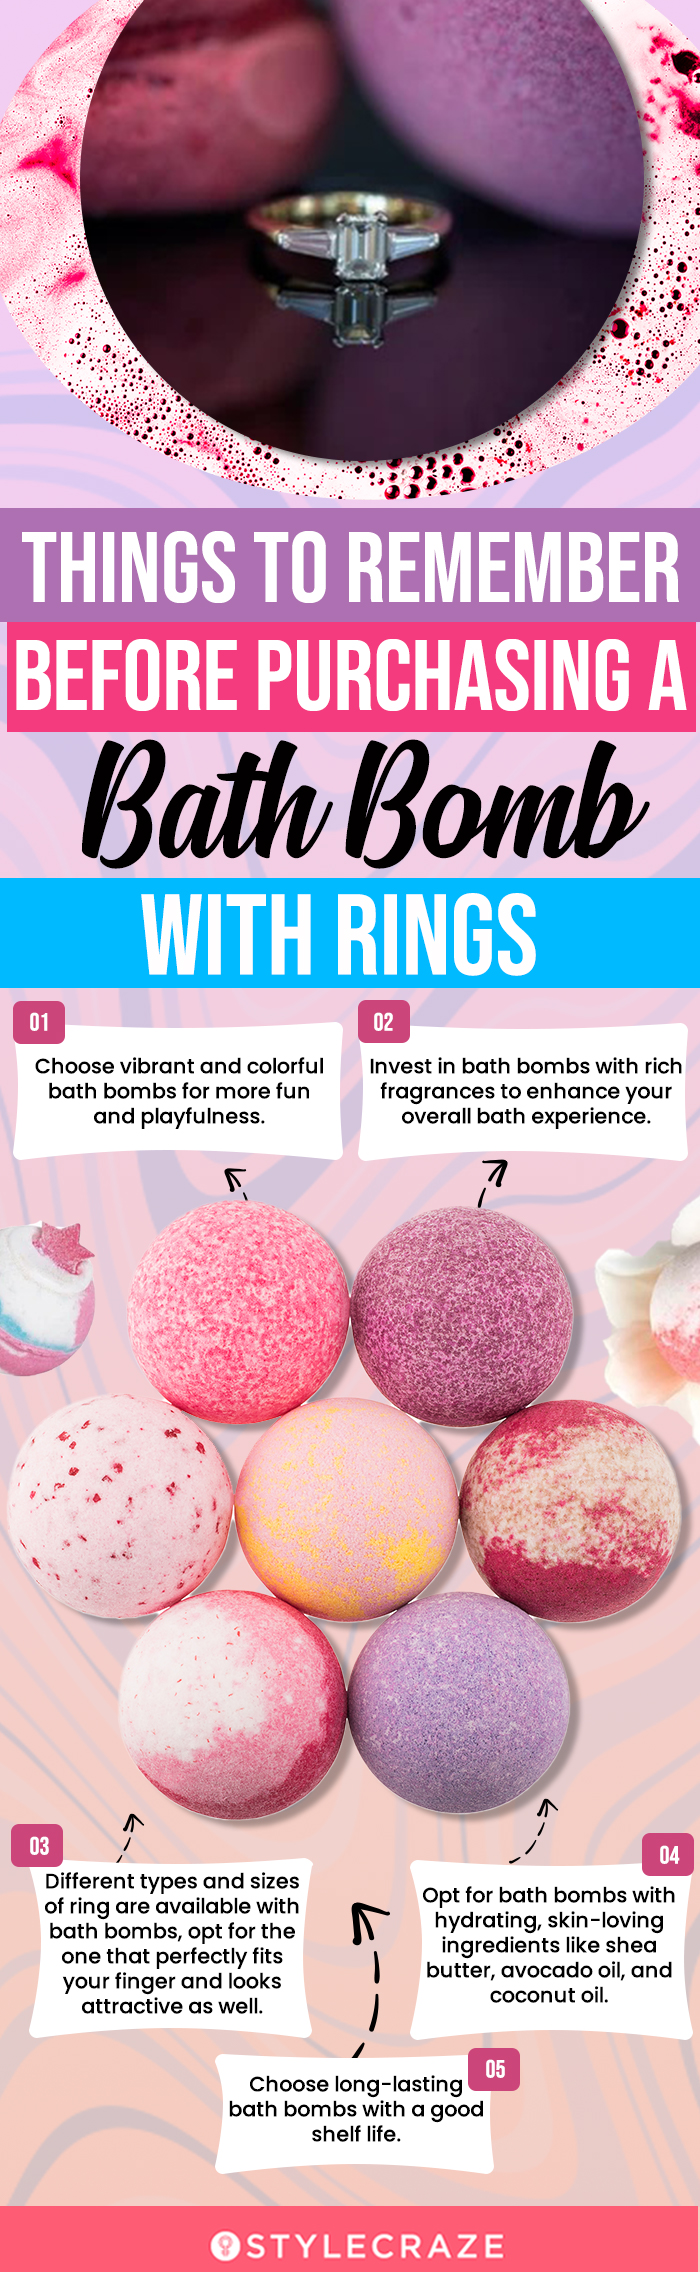 Things To Remember Before Purchasing A Bath Bomb With Rings (infographic)